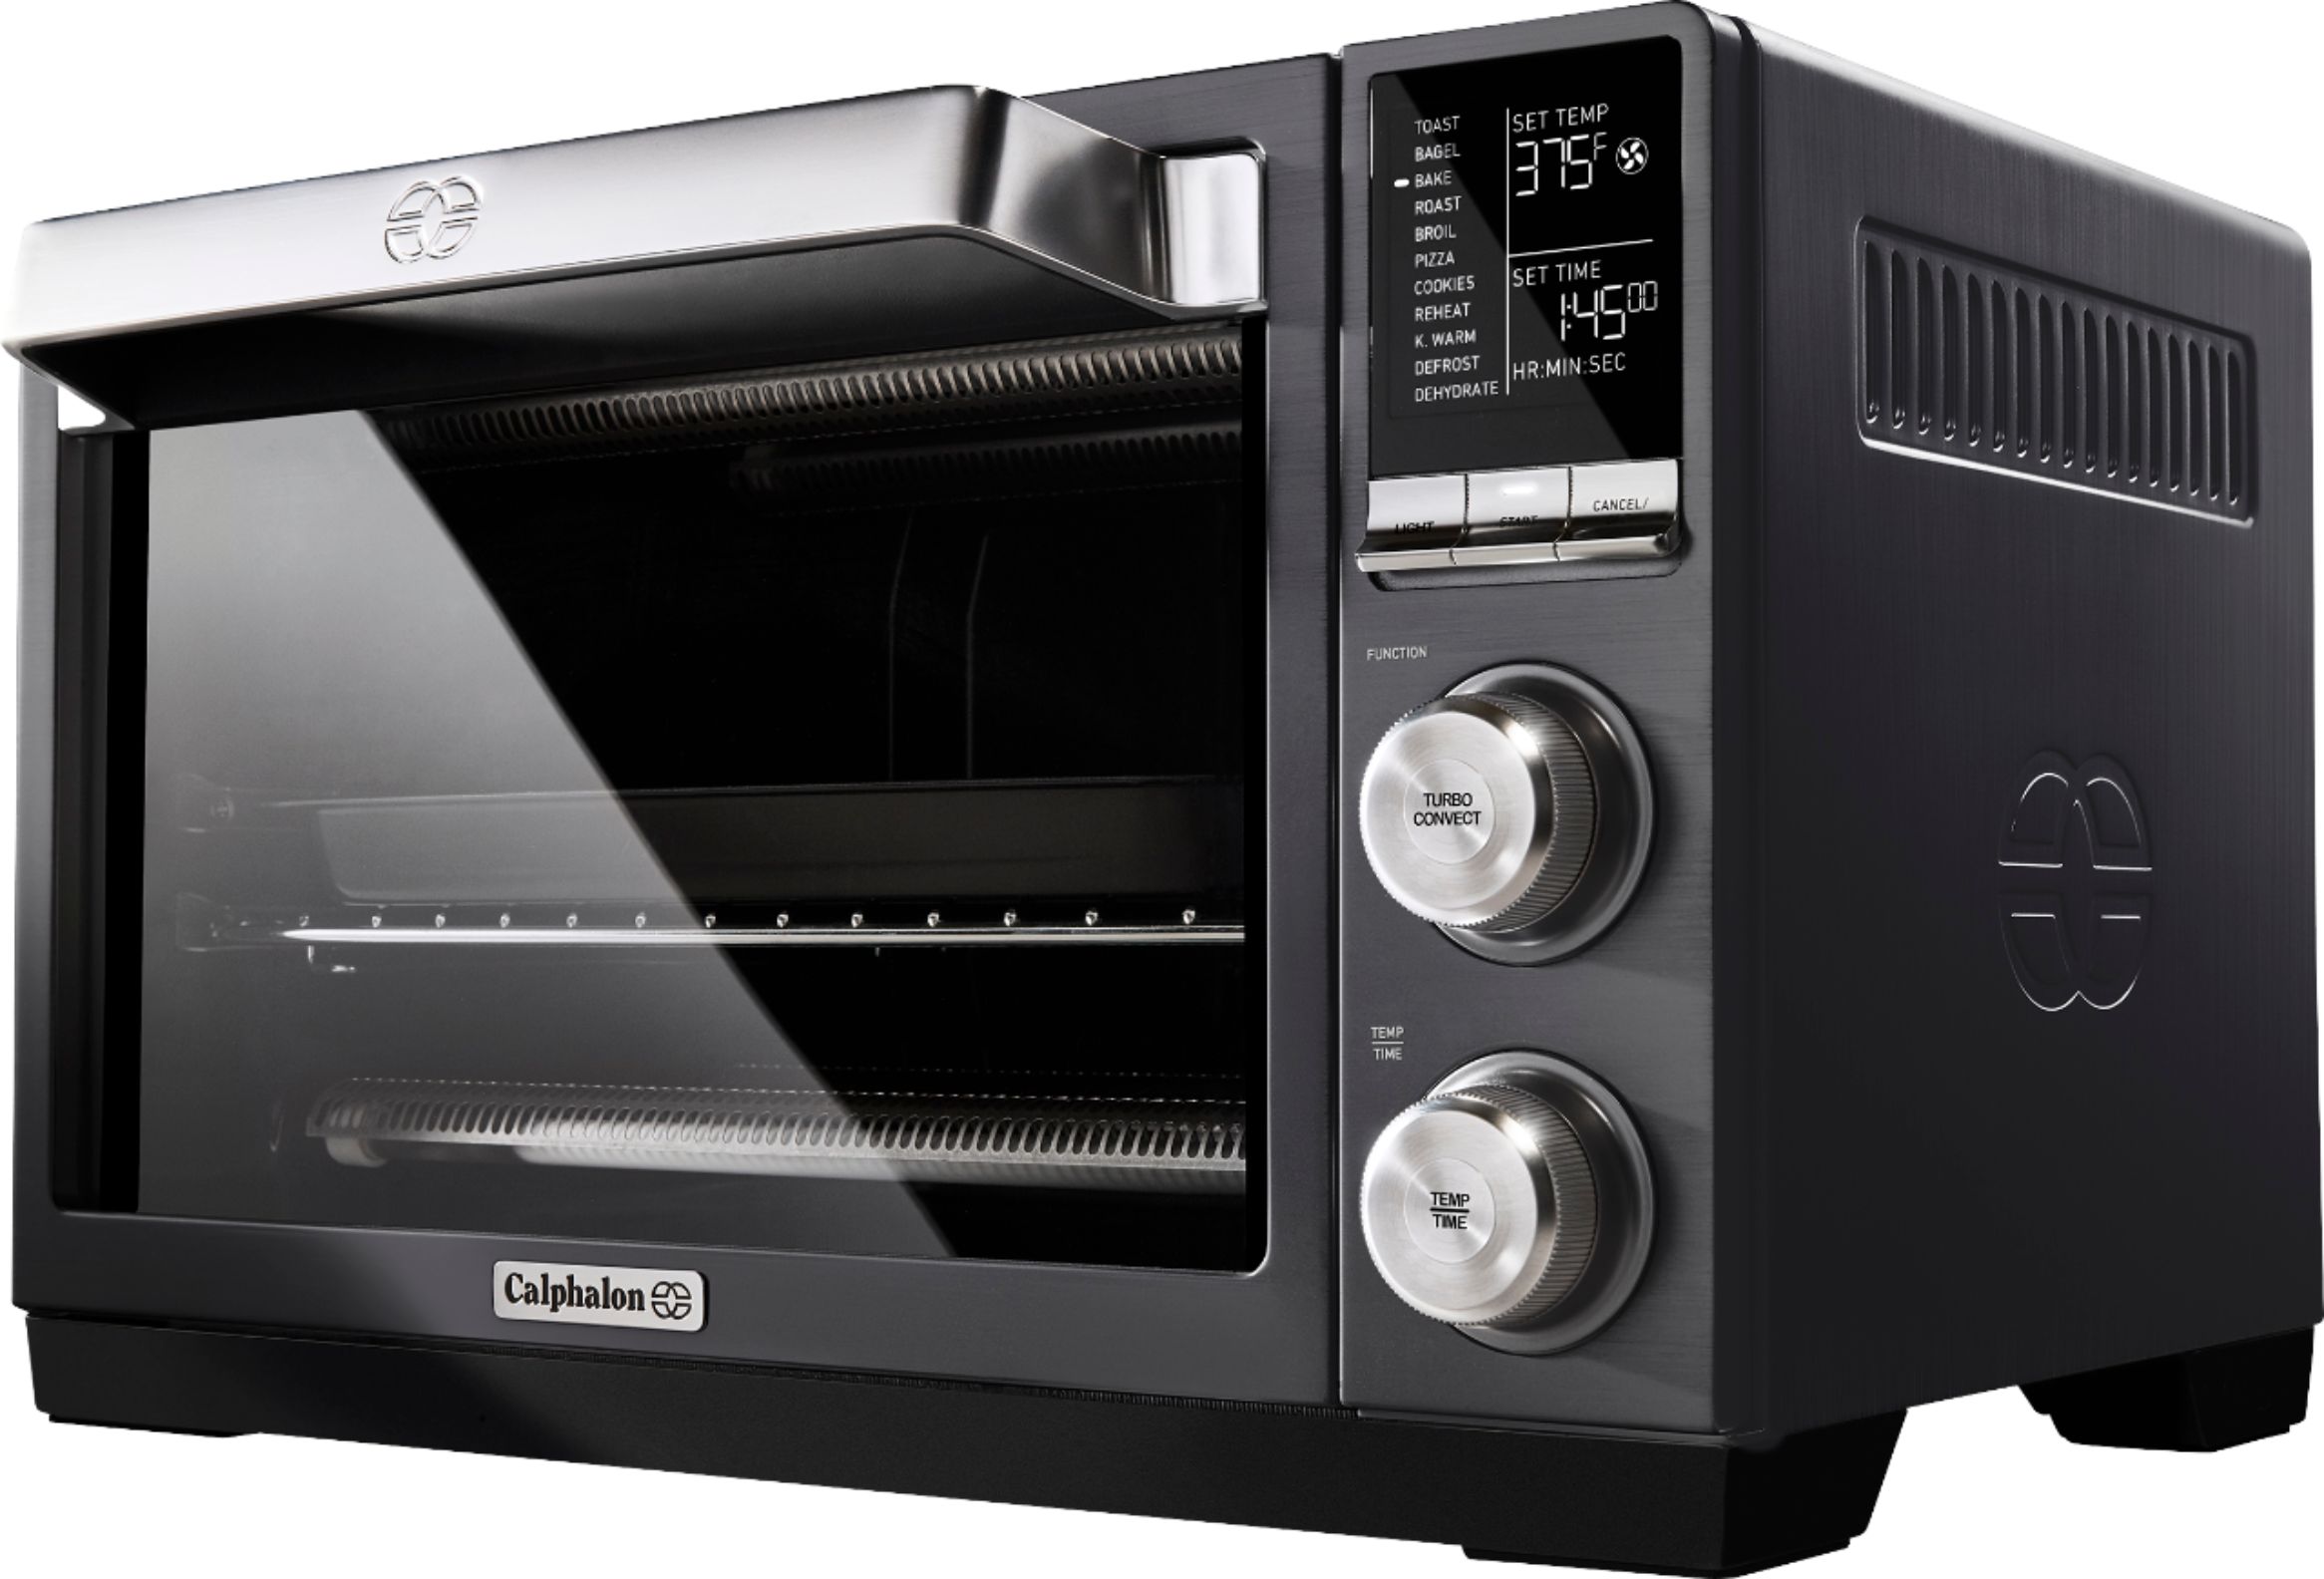 Calphalon Air Fry/Convection Oven,/Countertop Toaster Oven for Sale in  Chula Vista, CA - OfferUp